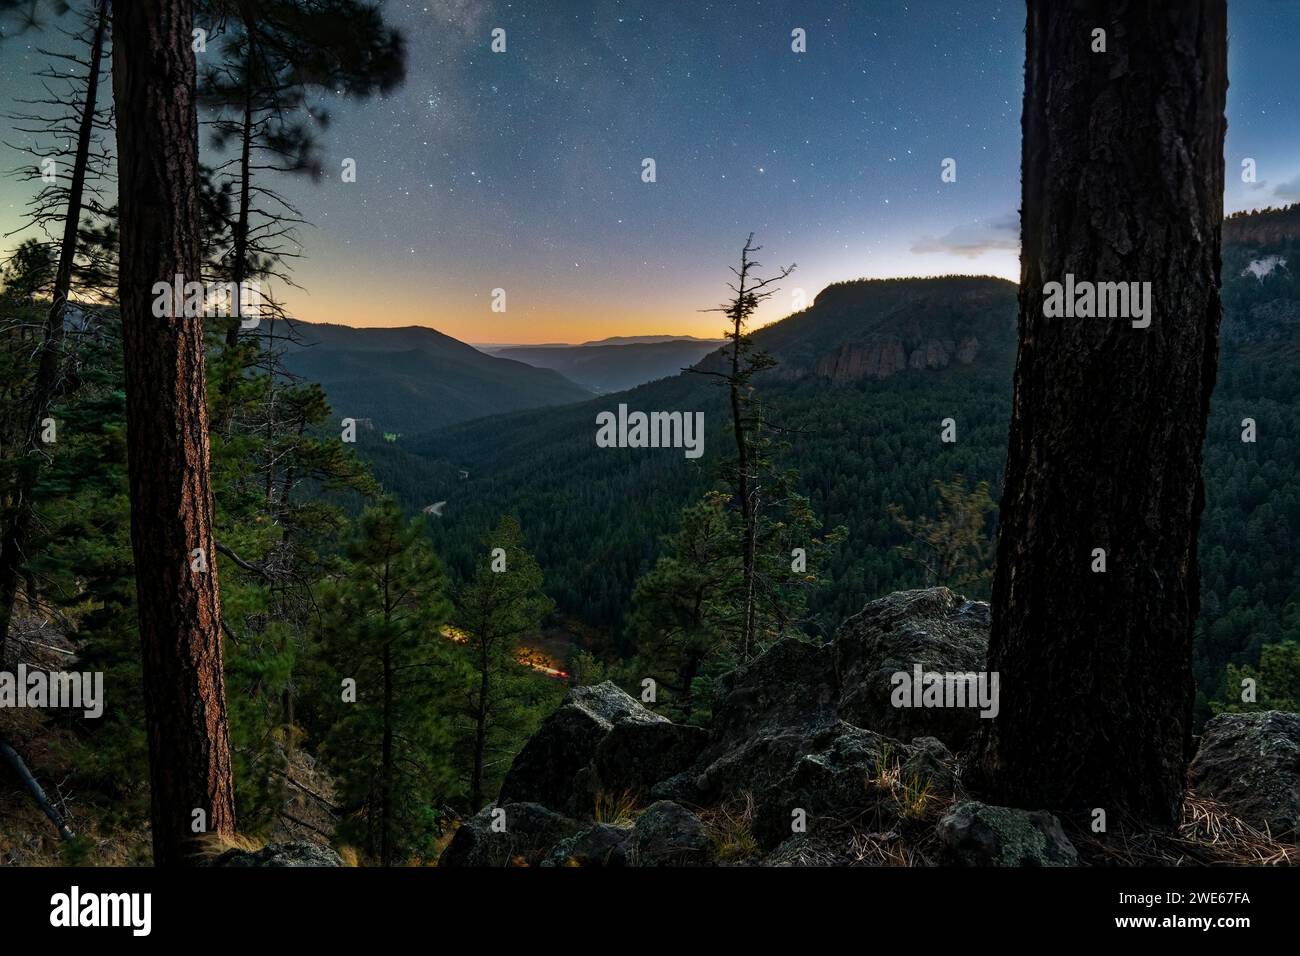 Sterne und Sonnenuntergang vom San Diego Canyon Overlook in New Mexico, Santa Fe National Forest. Stockfoto